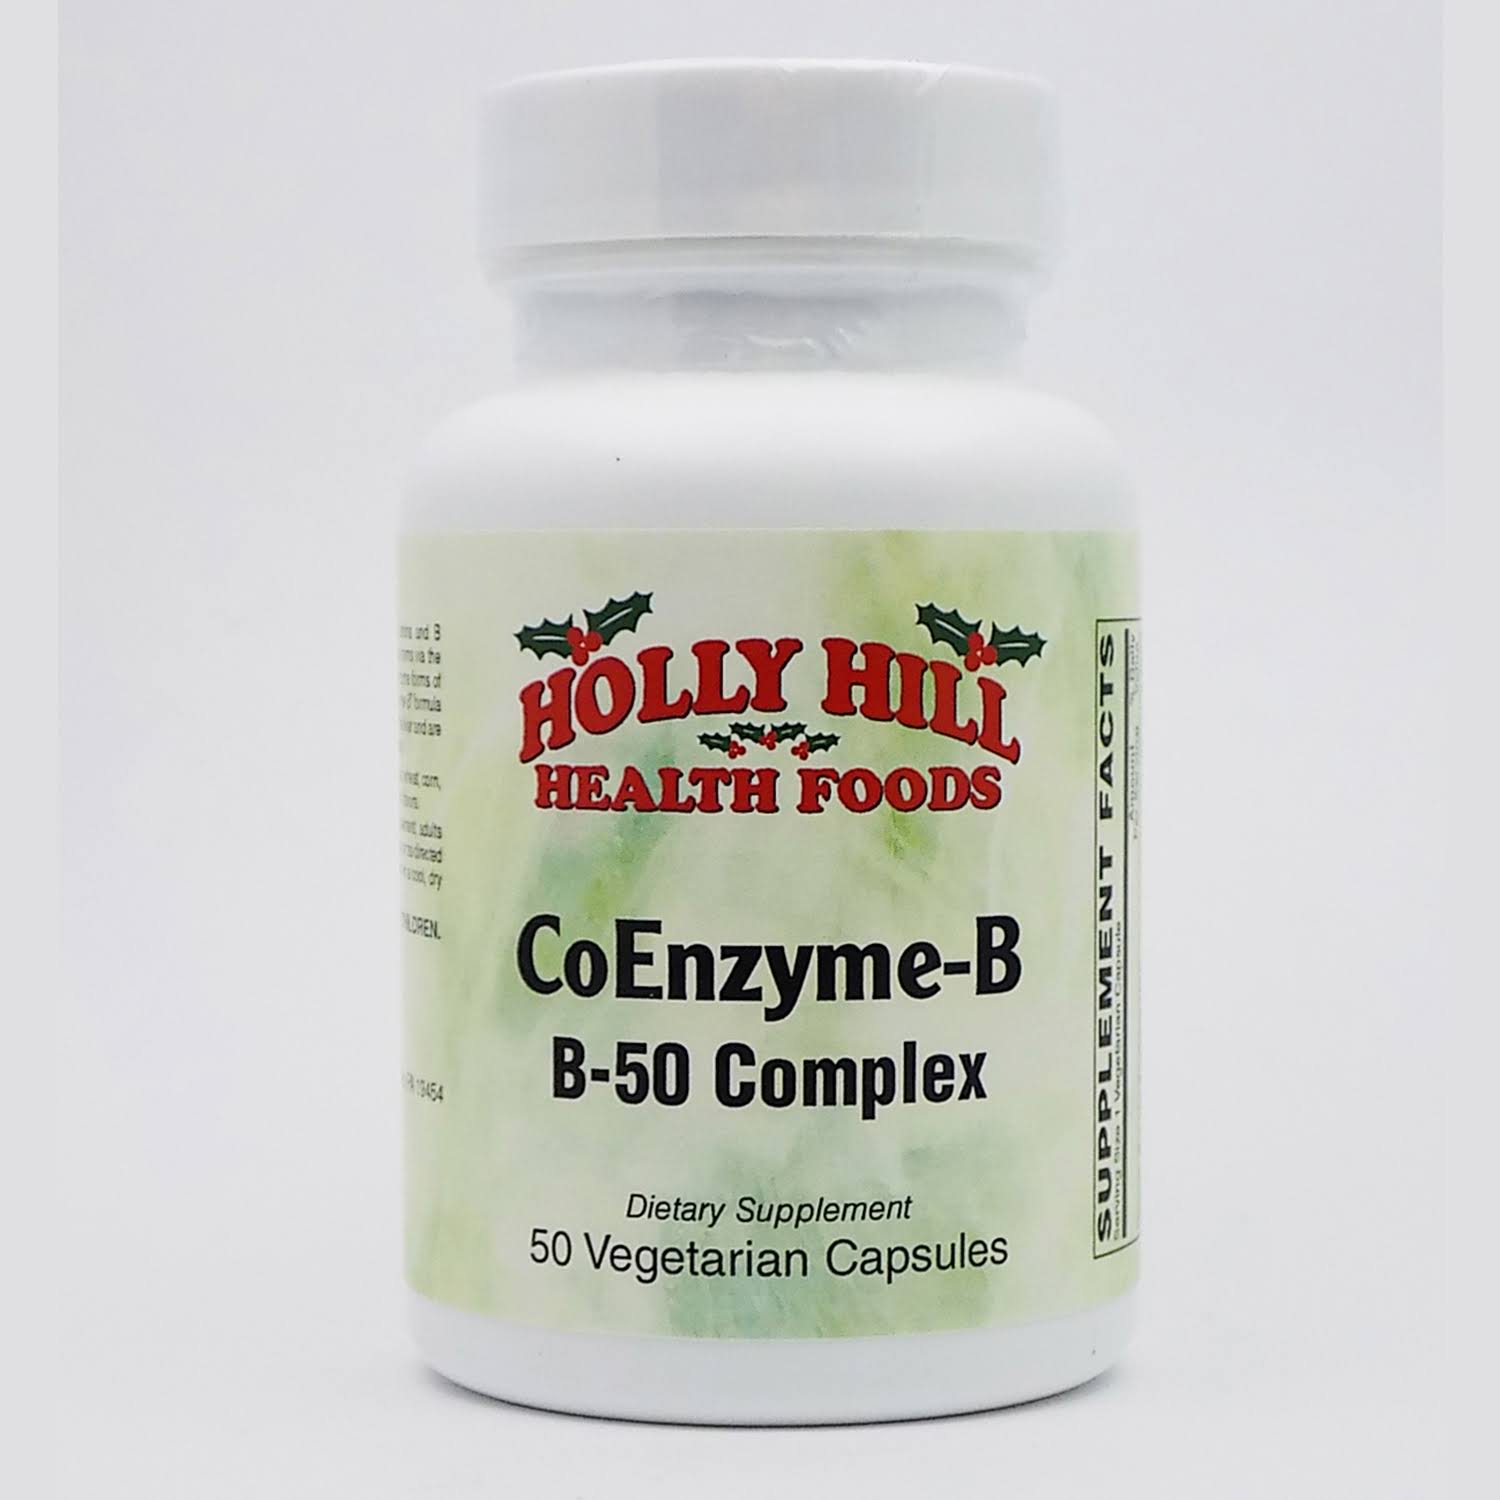 Holly Hill Health Foods, CoEnzyme-B, B-50 Complex, 50 Vegetarian Capsules